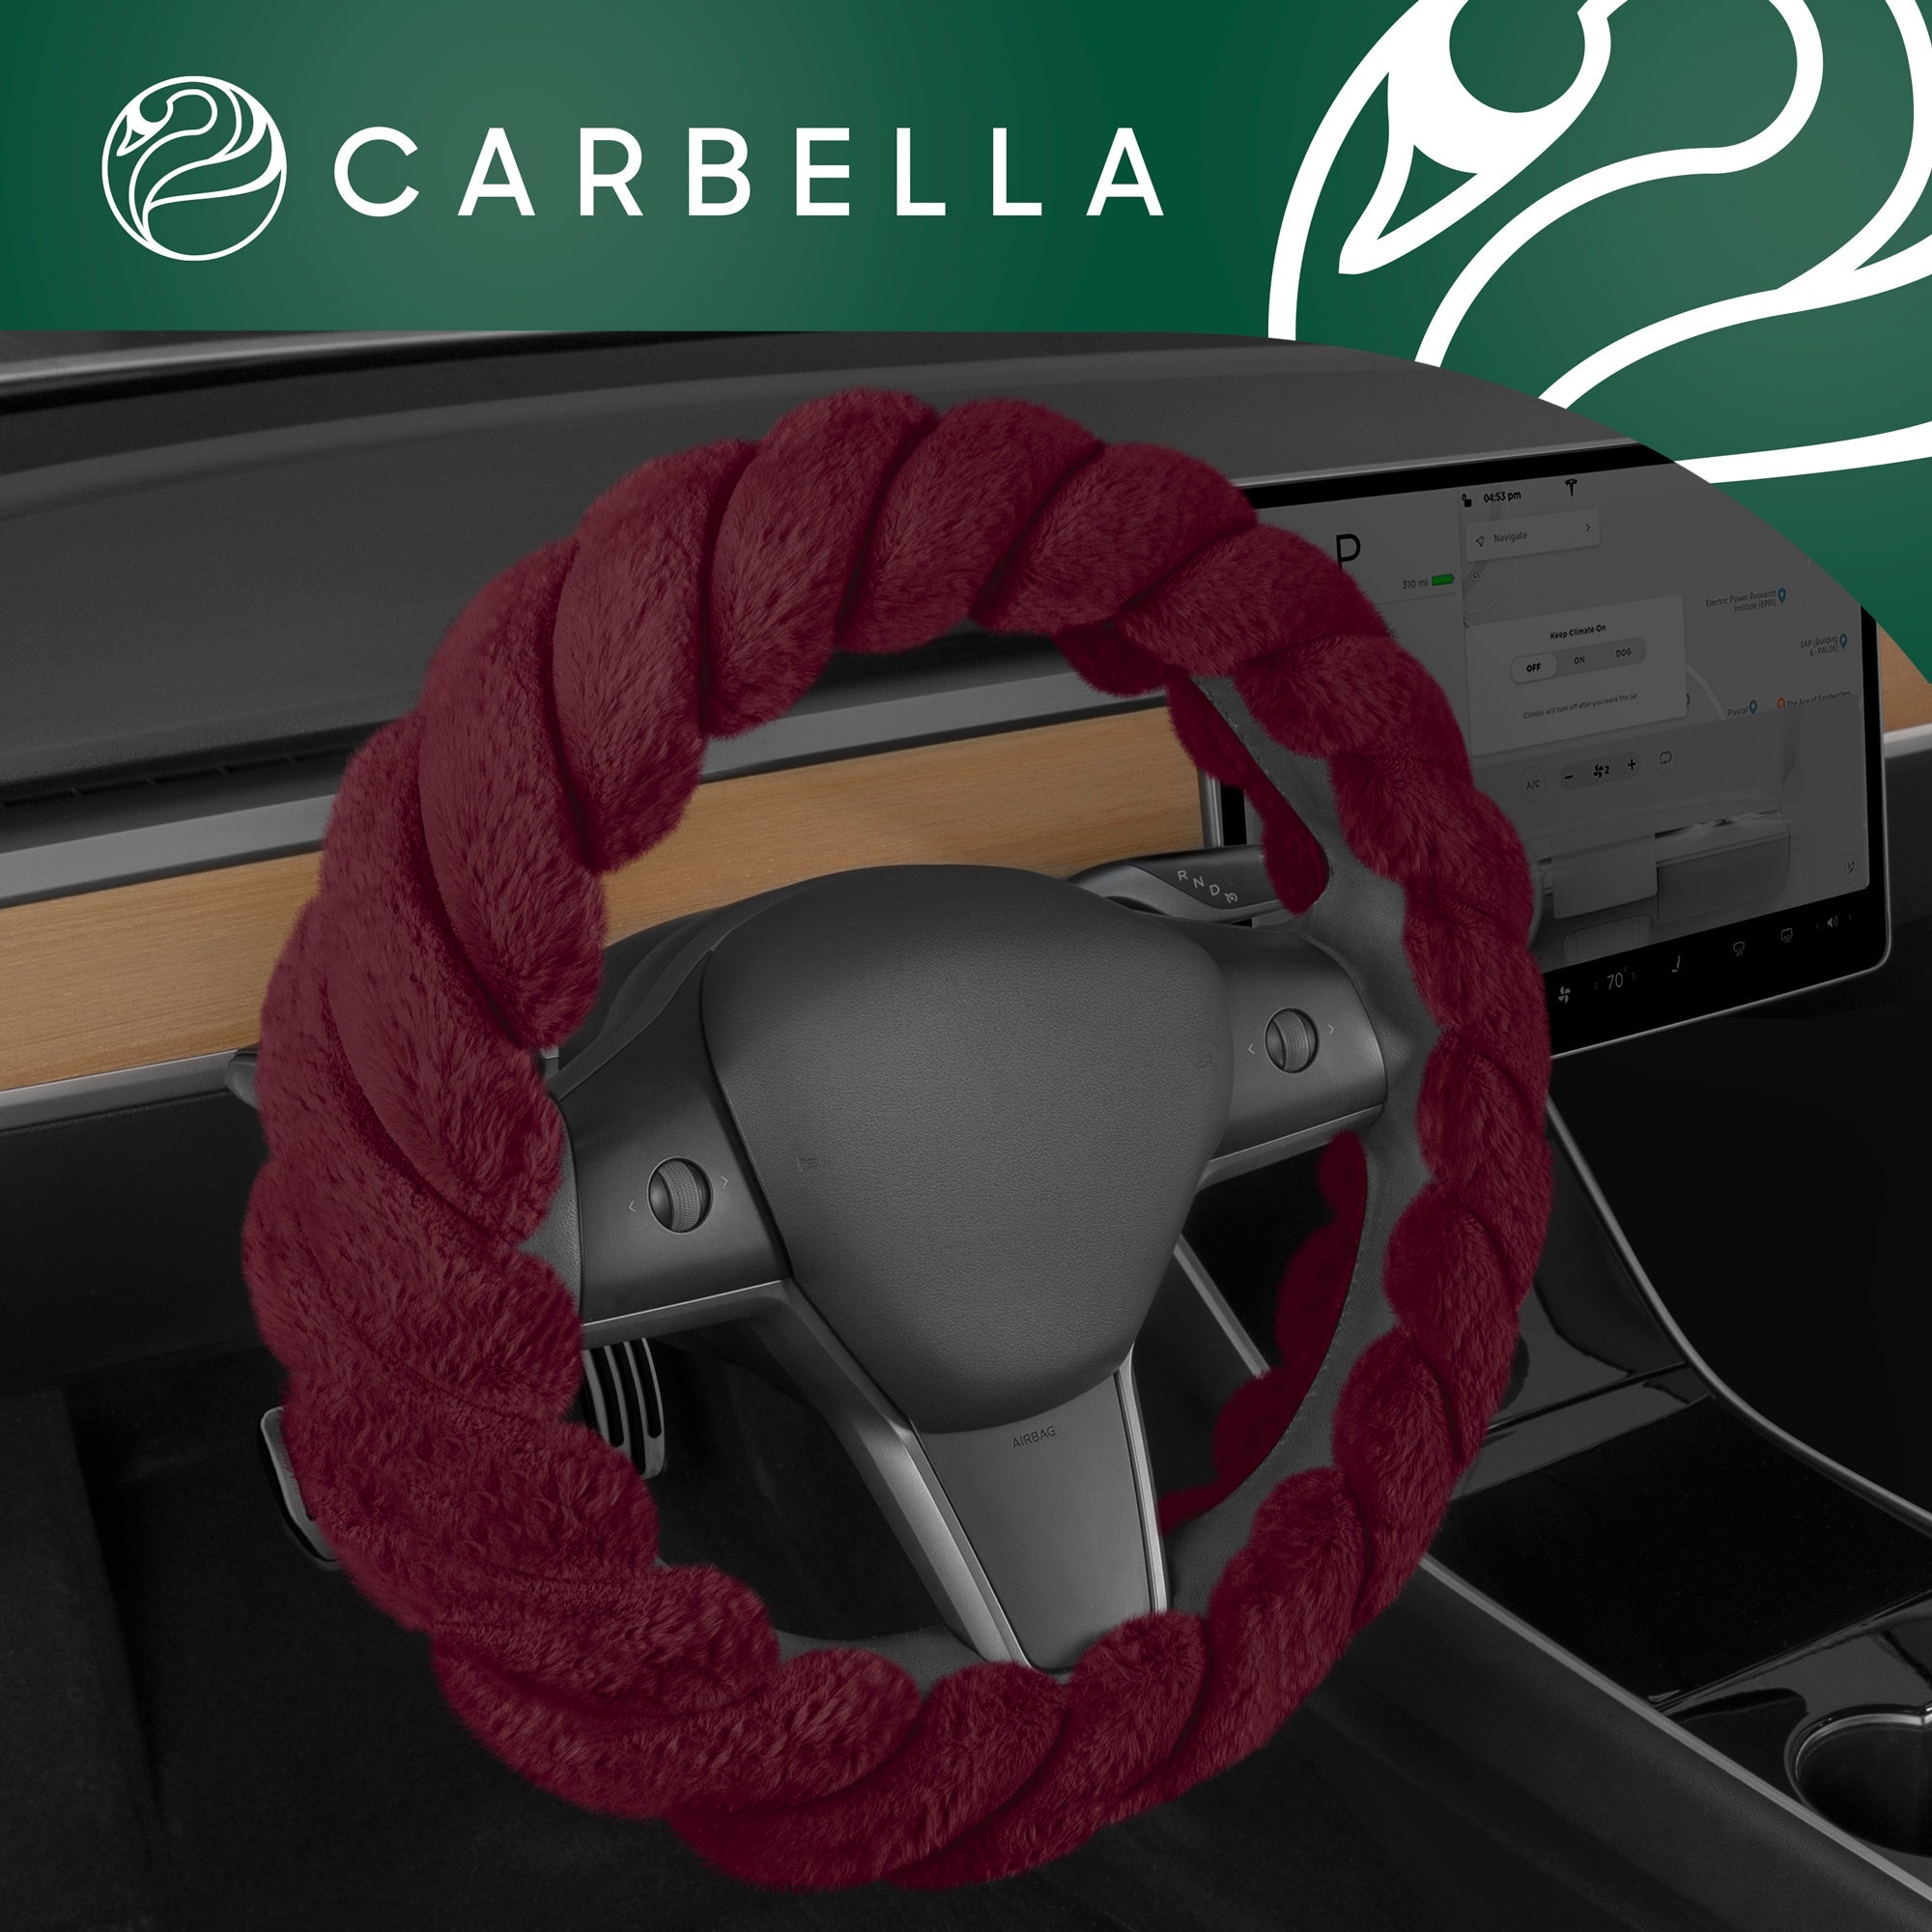 Carbella Twisted Fur Red Steering Wheel Cover, Standard 15 Inch Size Fits Most Vehicles, Fuzzy Fluffy Car Steering Cover with Soft Faux Fur Touch, Car Accessories for Women - Red